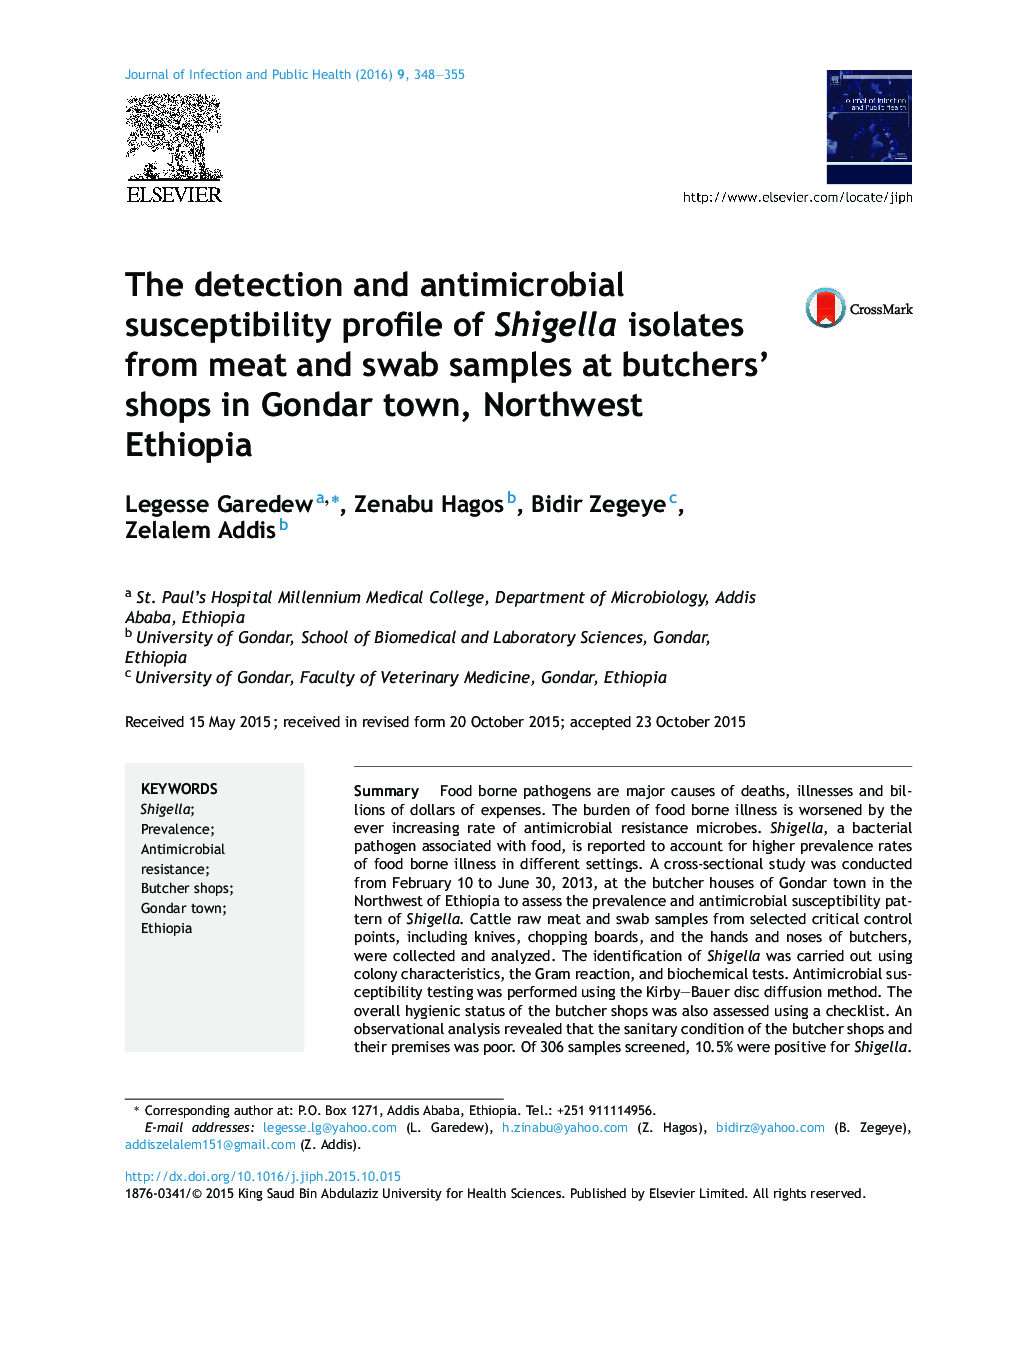 The detection and antimicrobial susceptibility profile of Shigella isolates from meat and swab samples at butchers’ shops in Gondar town, Northwest Ethiopia